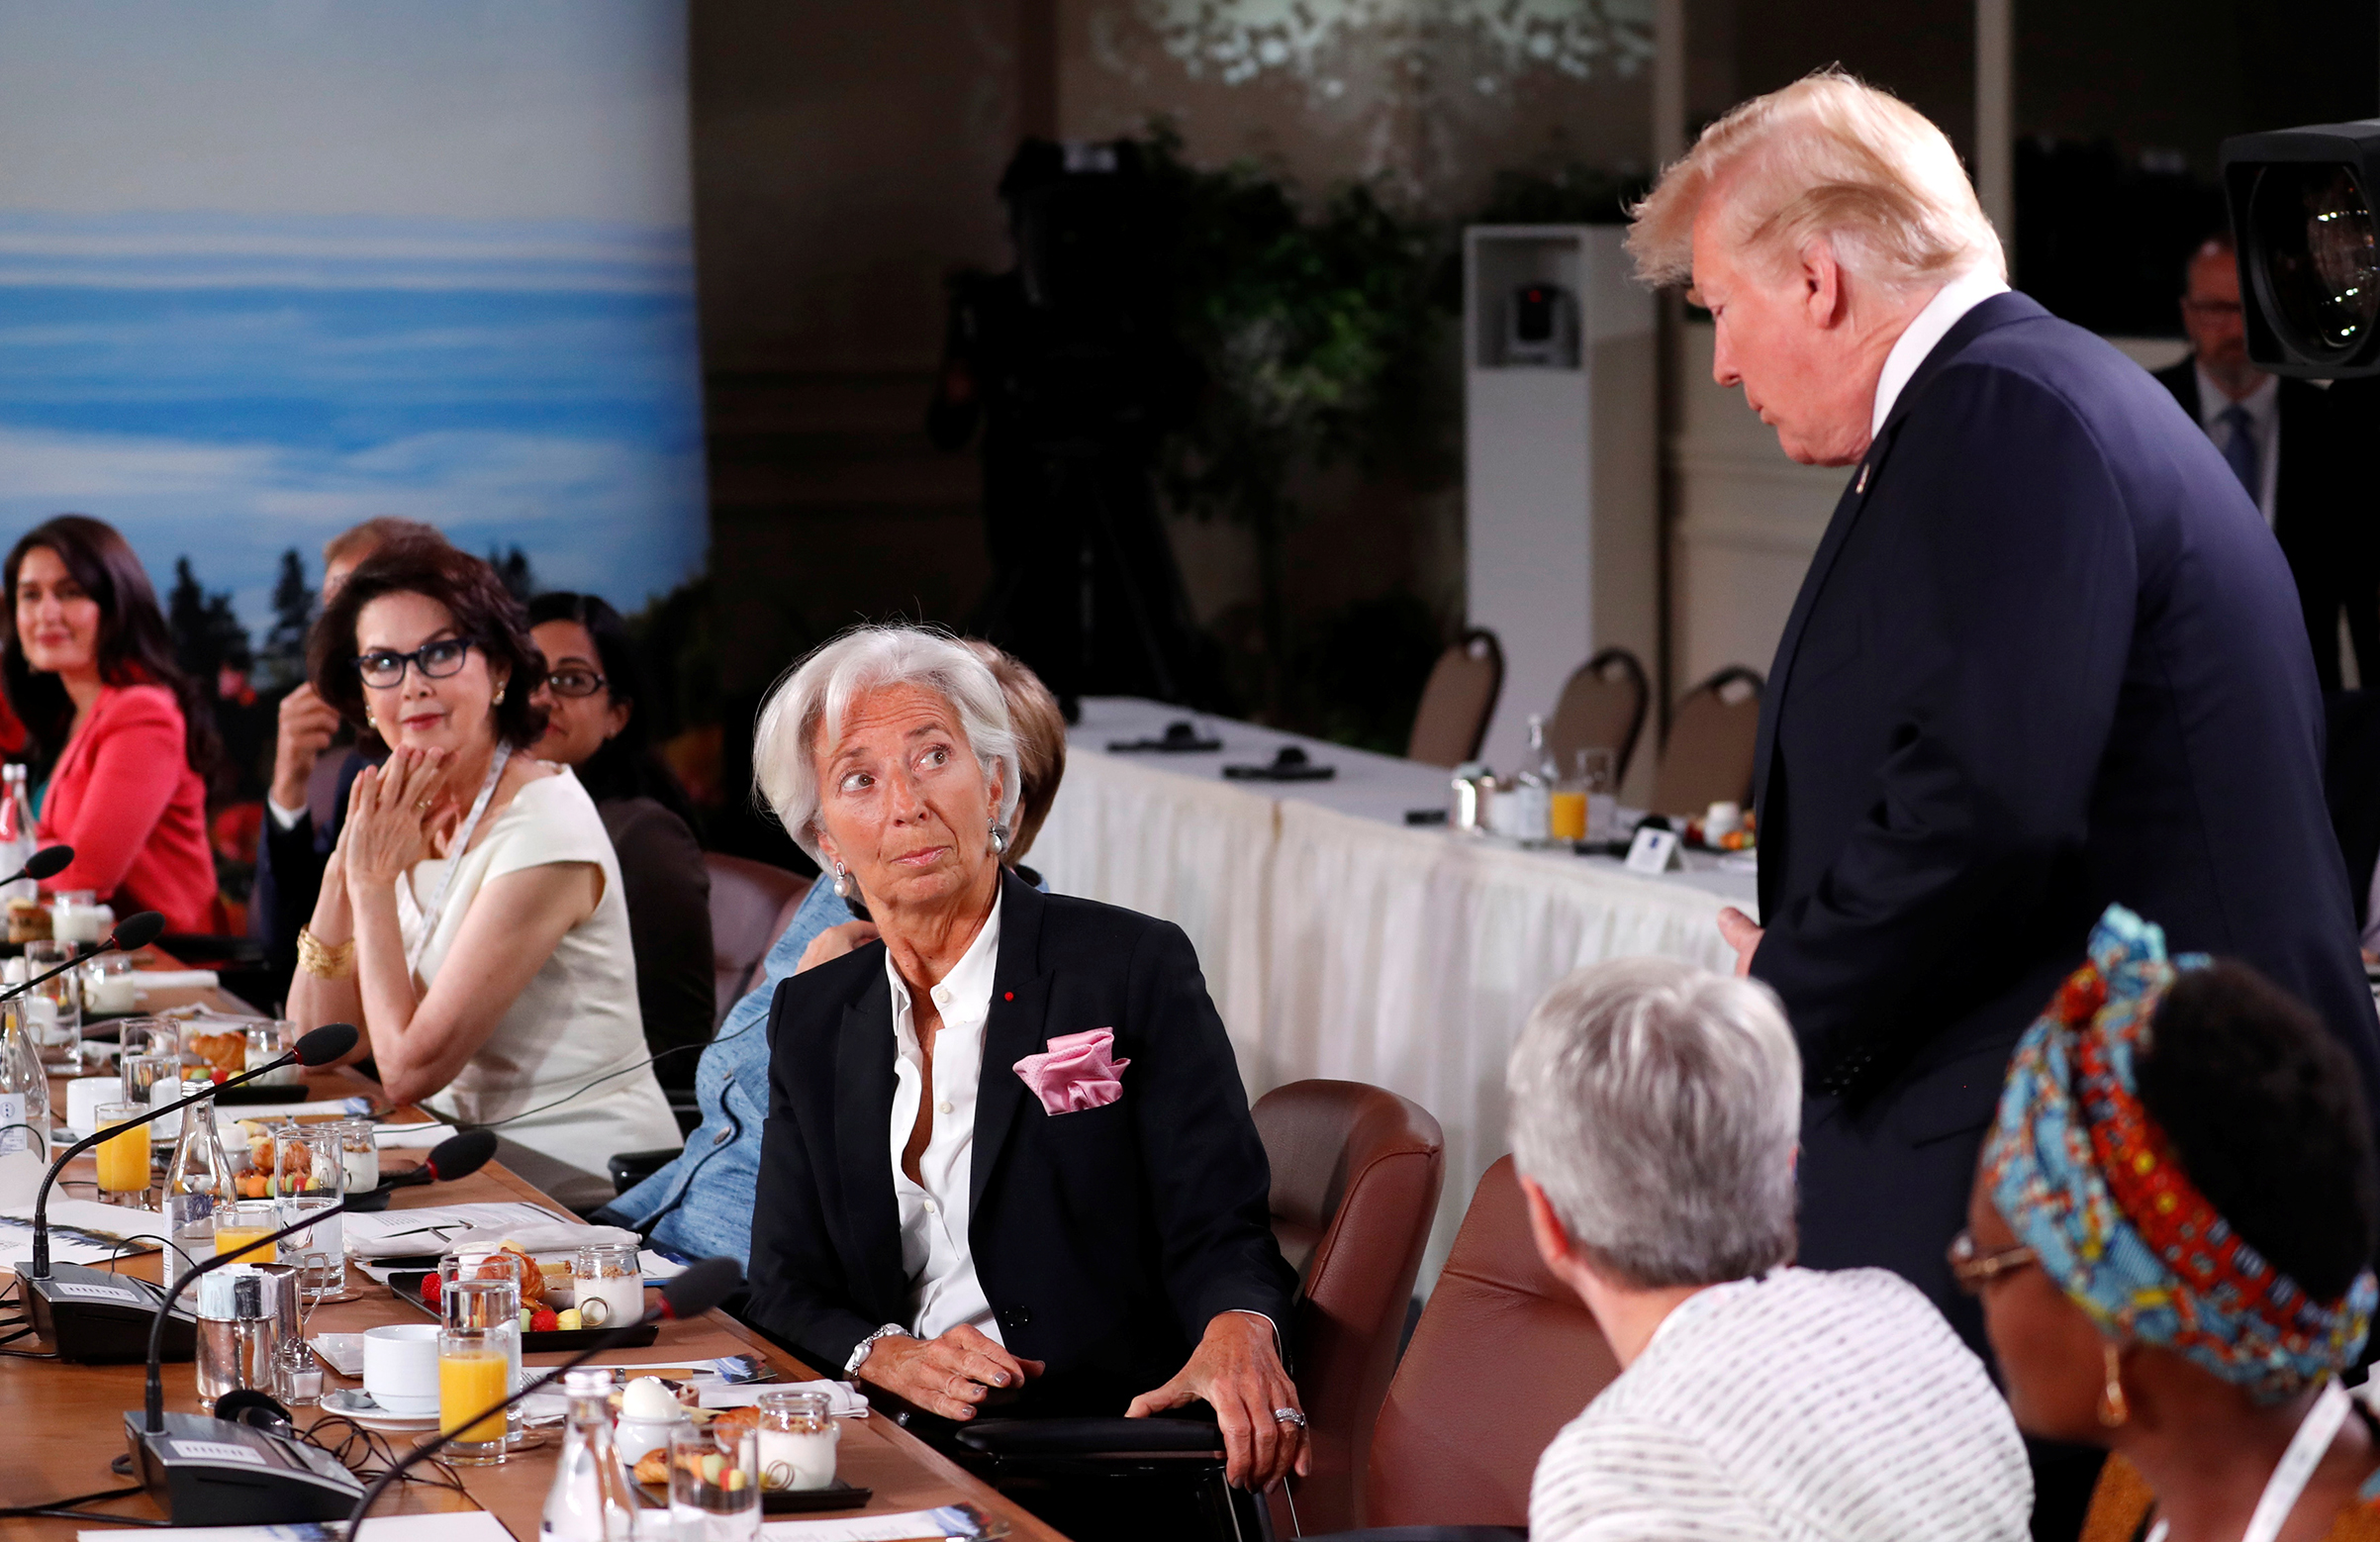 President Trump arrives as Managing Director of the International Monetary Fund, Christine Lagarde, looks up while they attend a G7 and Gender Equality Advisory Council meeting as part of the summit in Canada on June 9, 2018. (Yves Herman—Reuters)